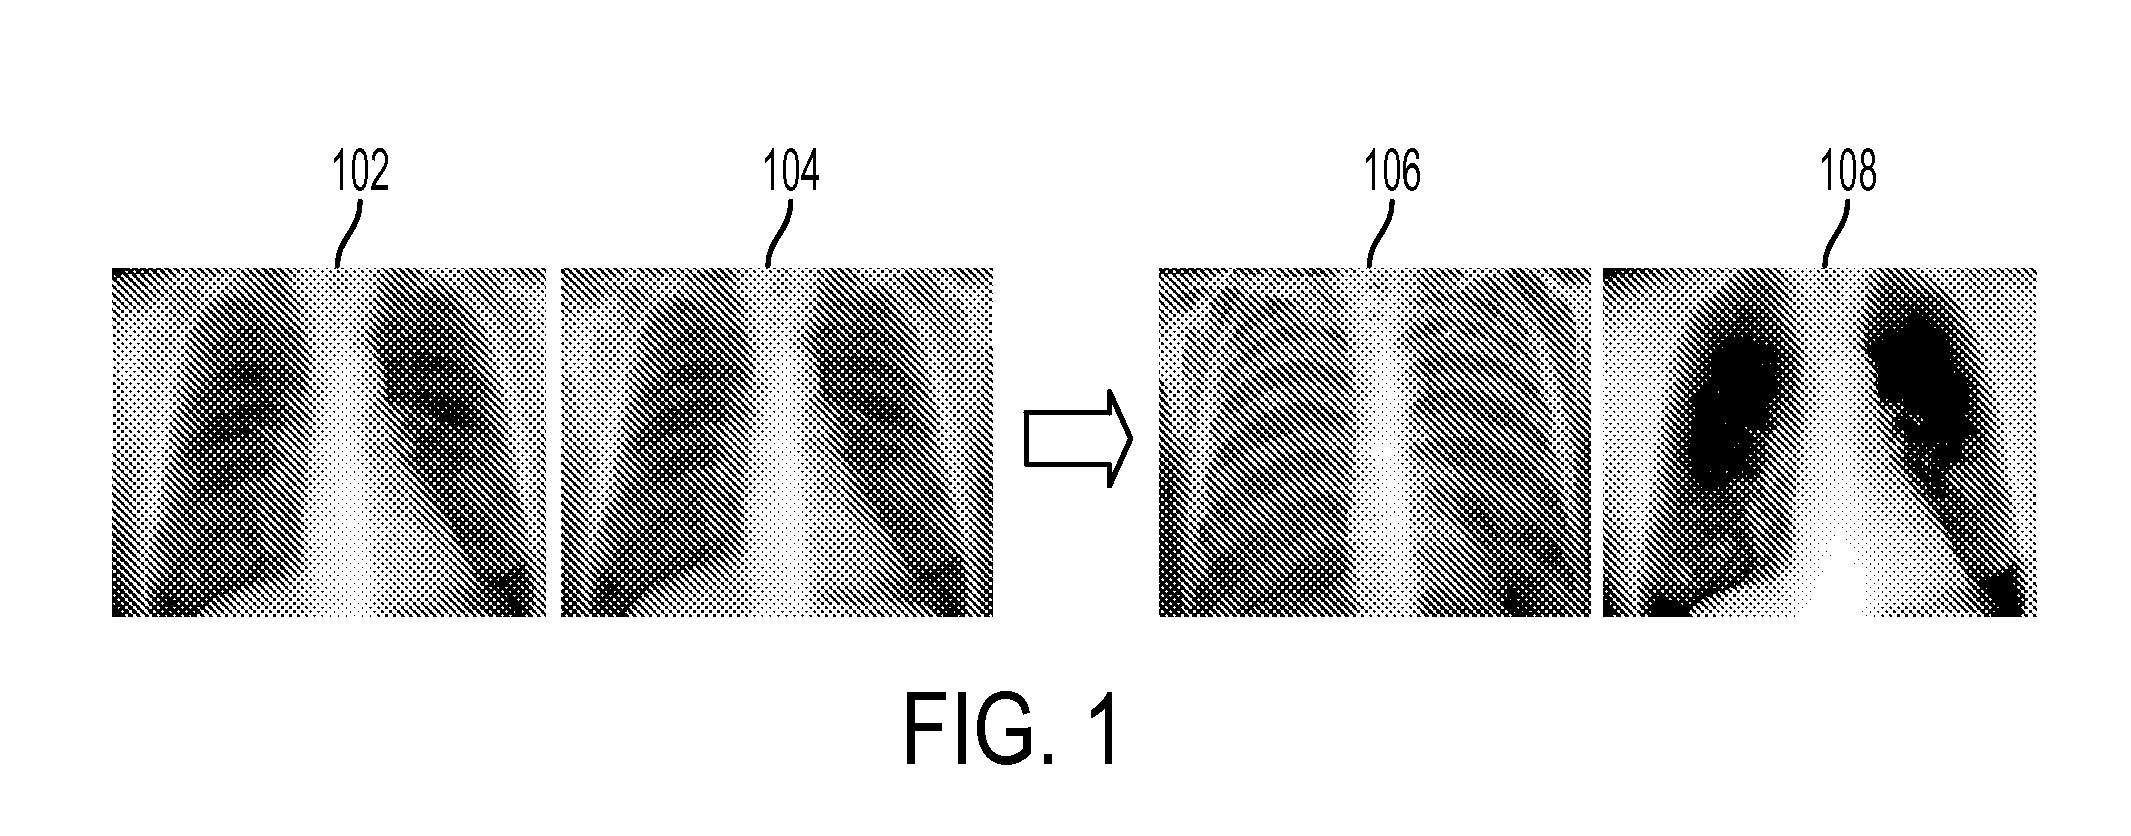 Method and system for bone suppression based on a single x-ray image